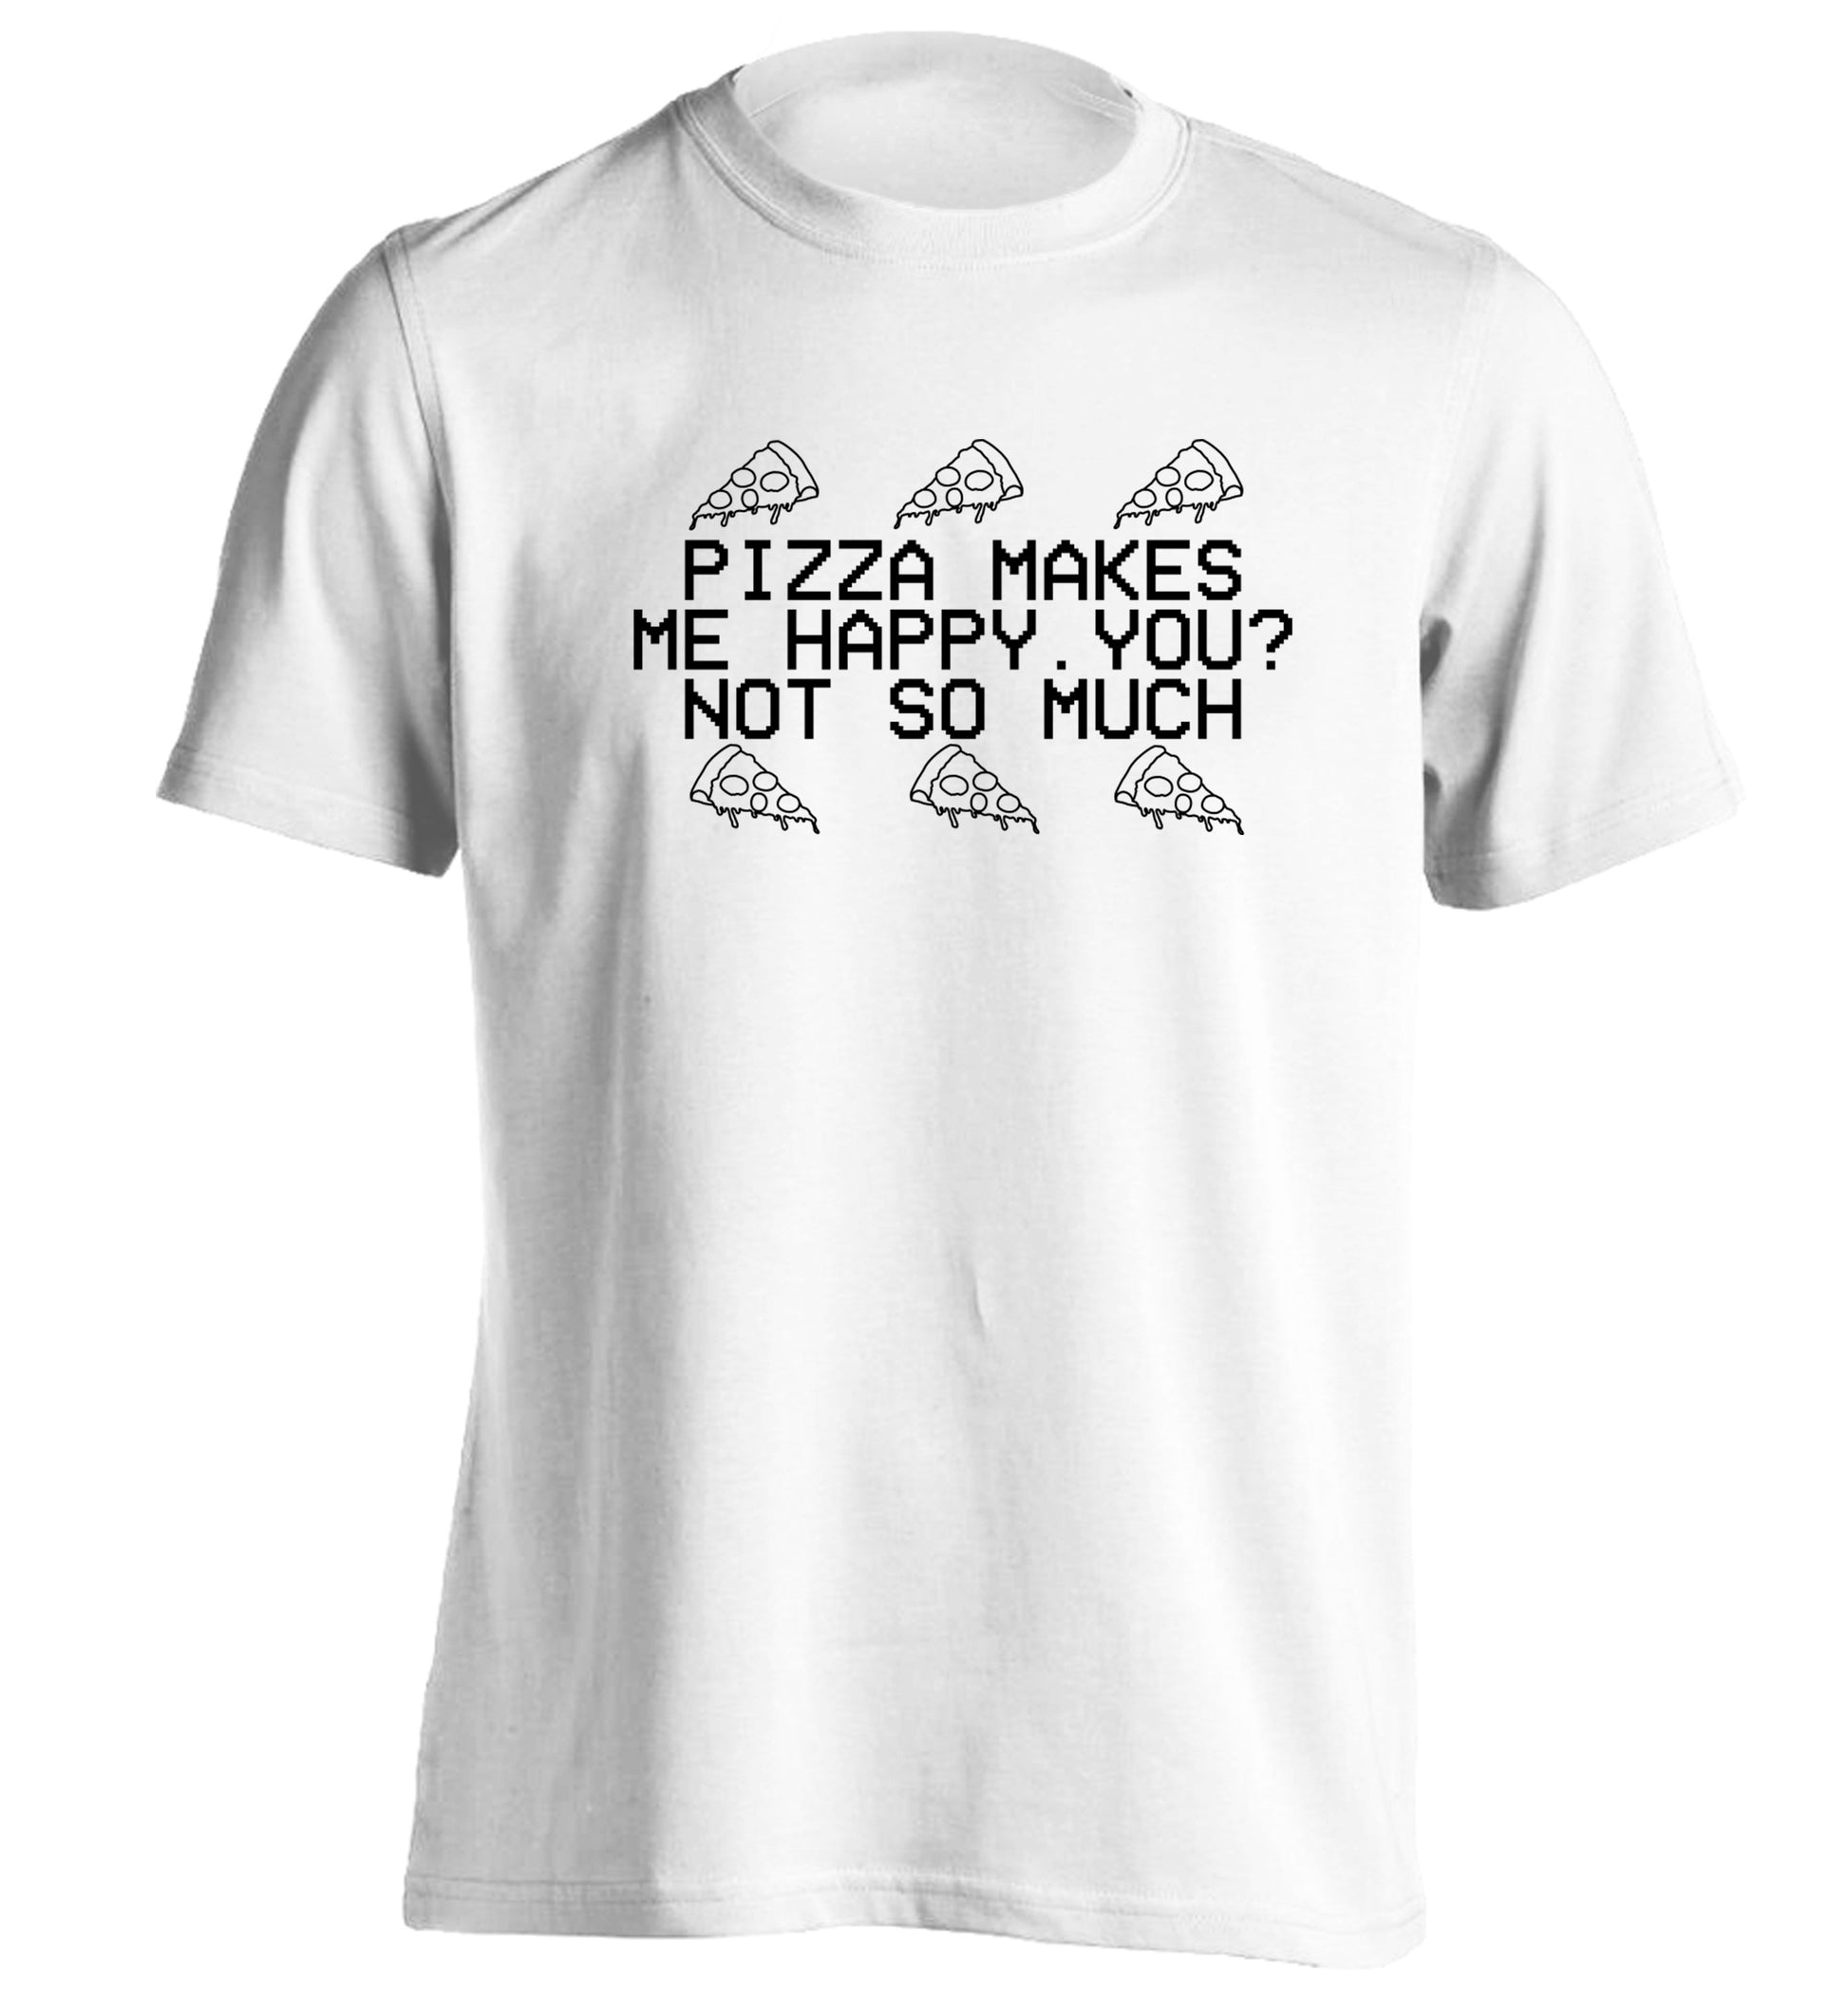 Pizza makes me happy, You? Not so much adults unisex white Tshirt 2XL